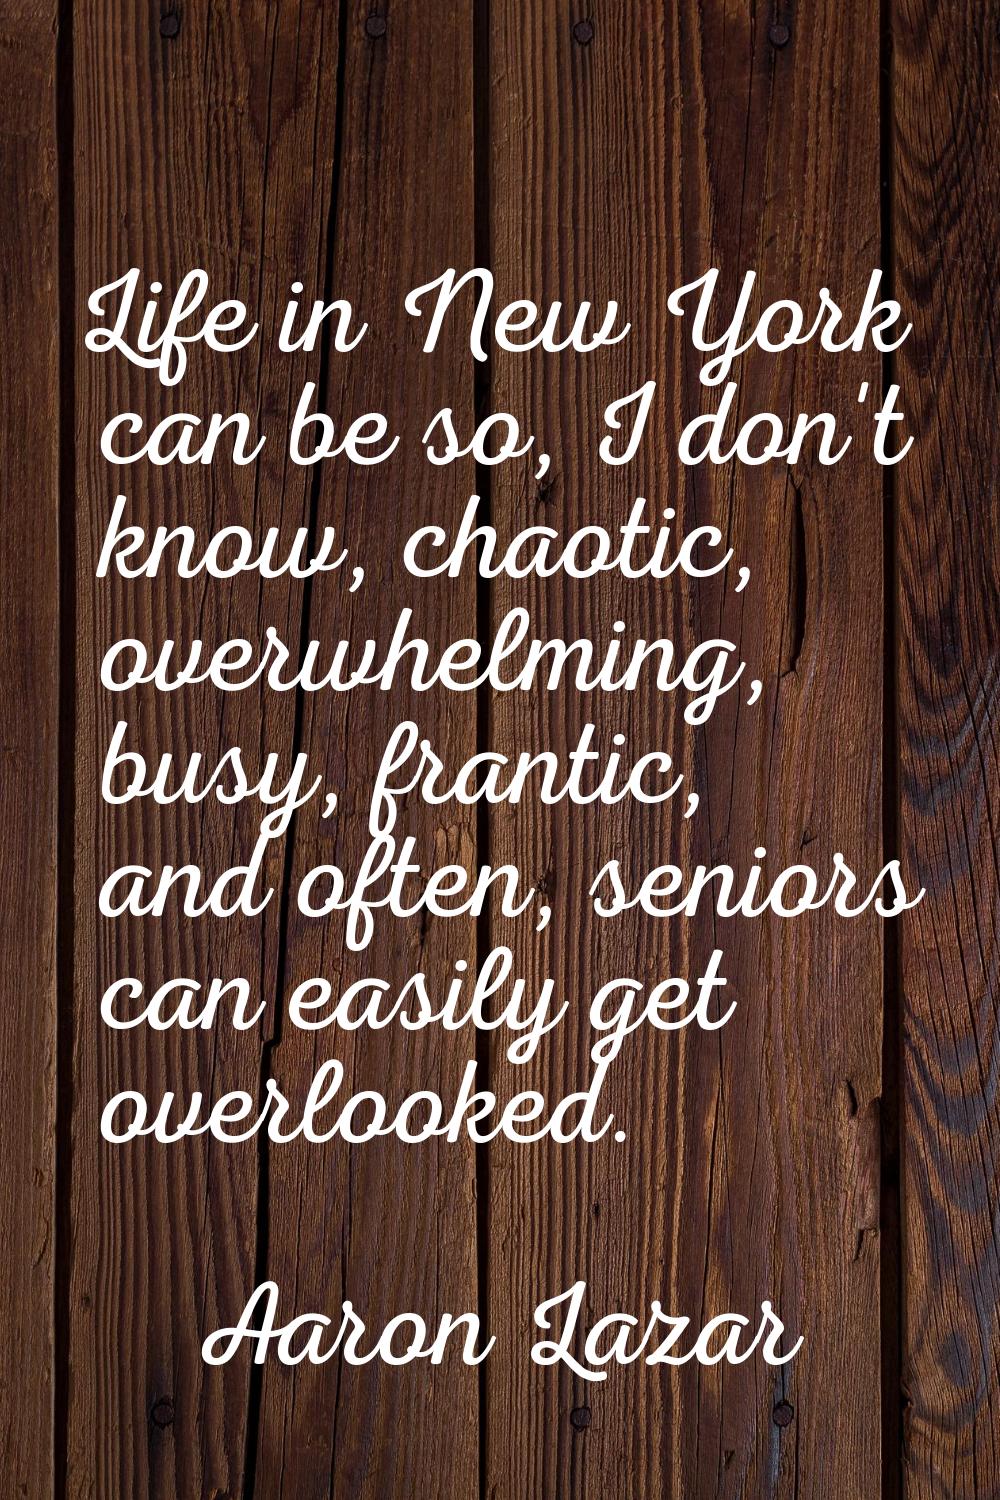 Life in New York can be so, I don't know, chaotic, overwhelming, busy, frantic, and often, seniors 